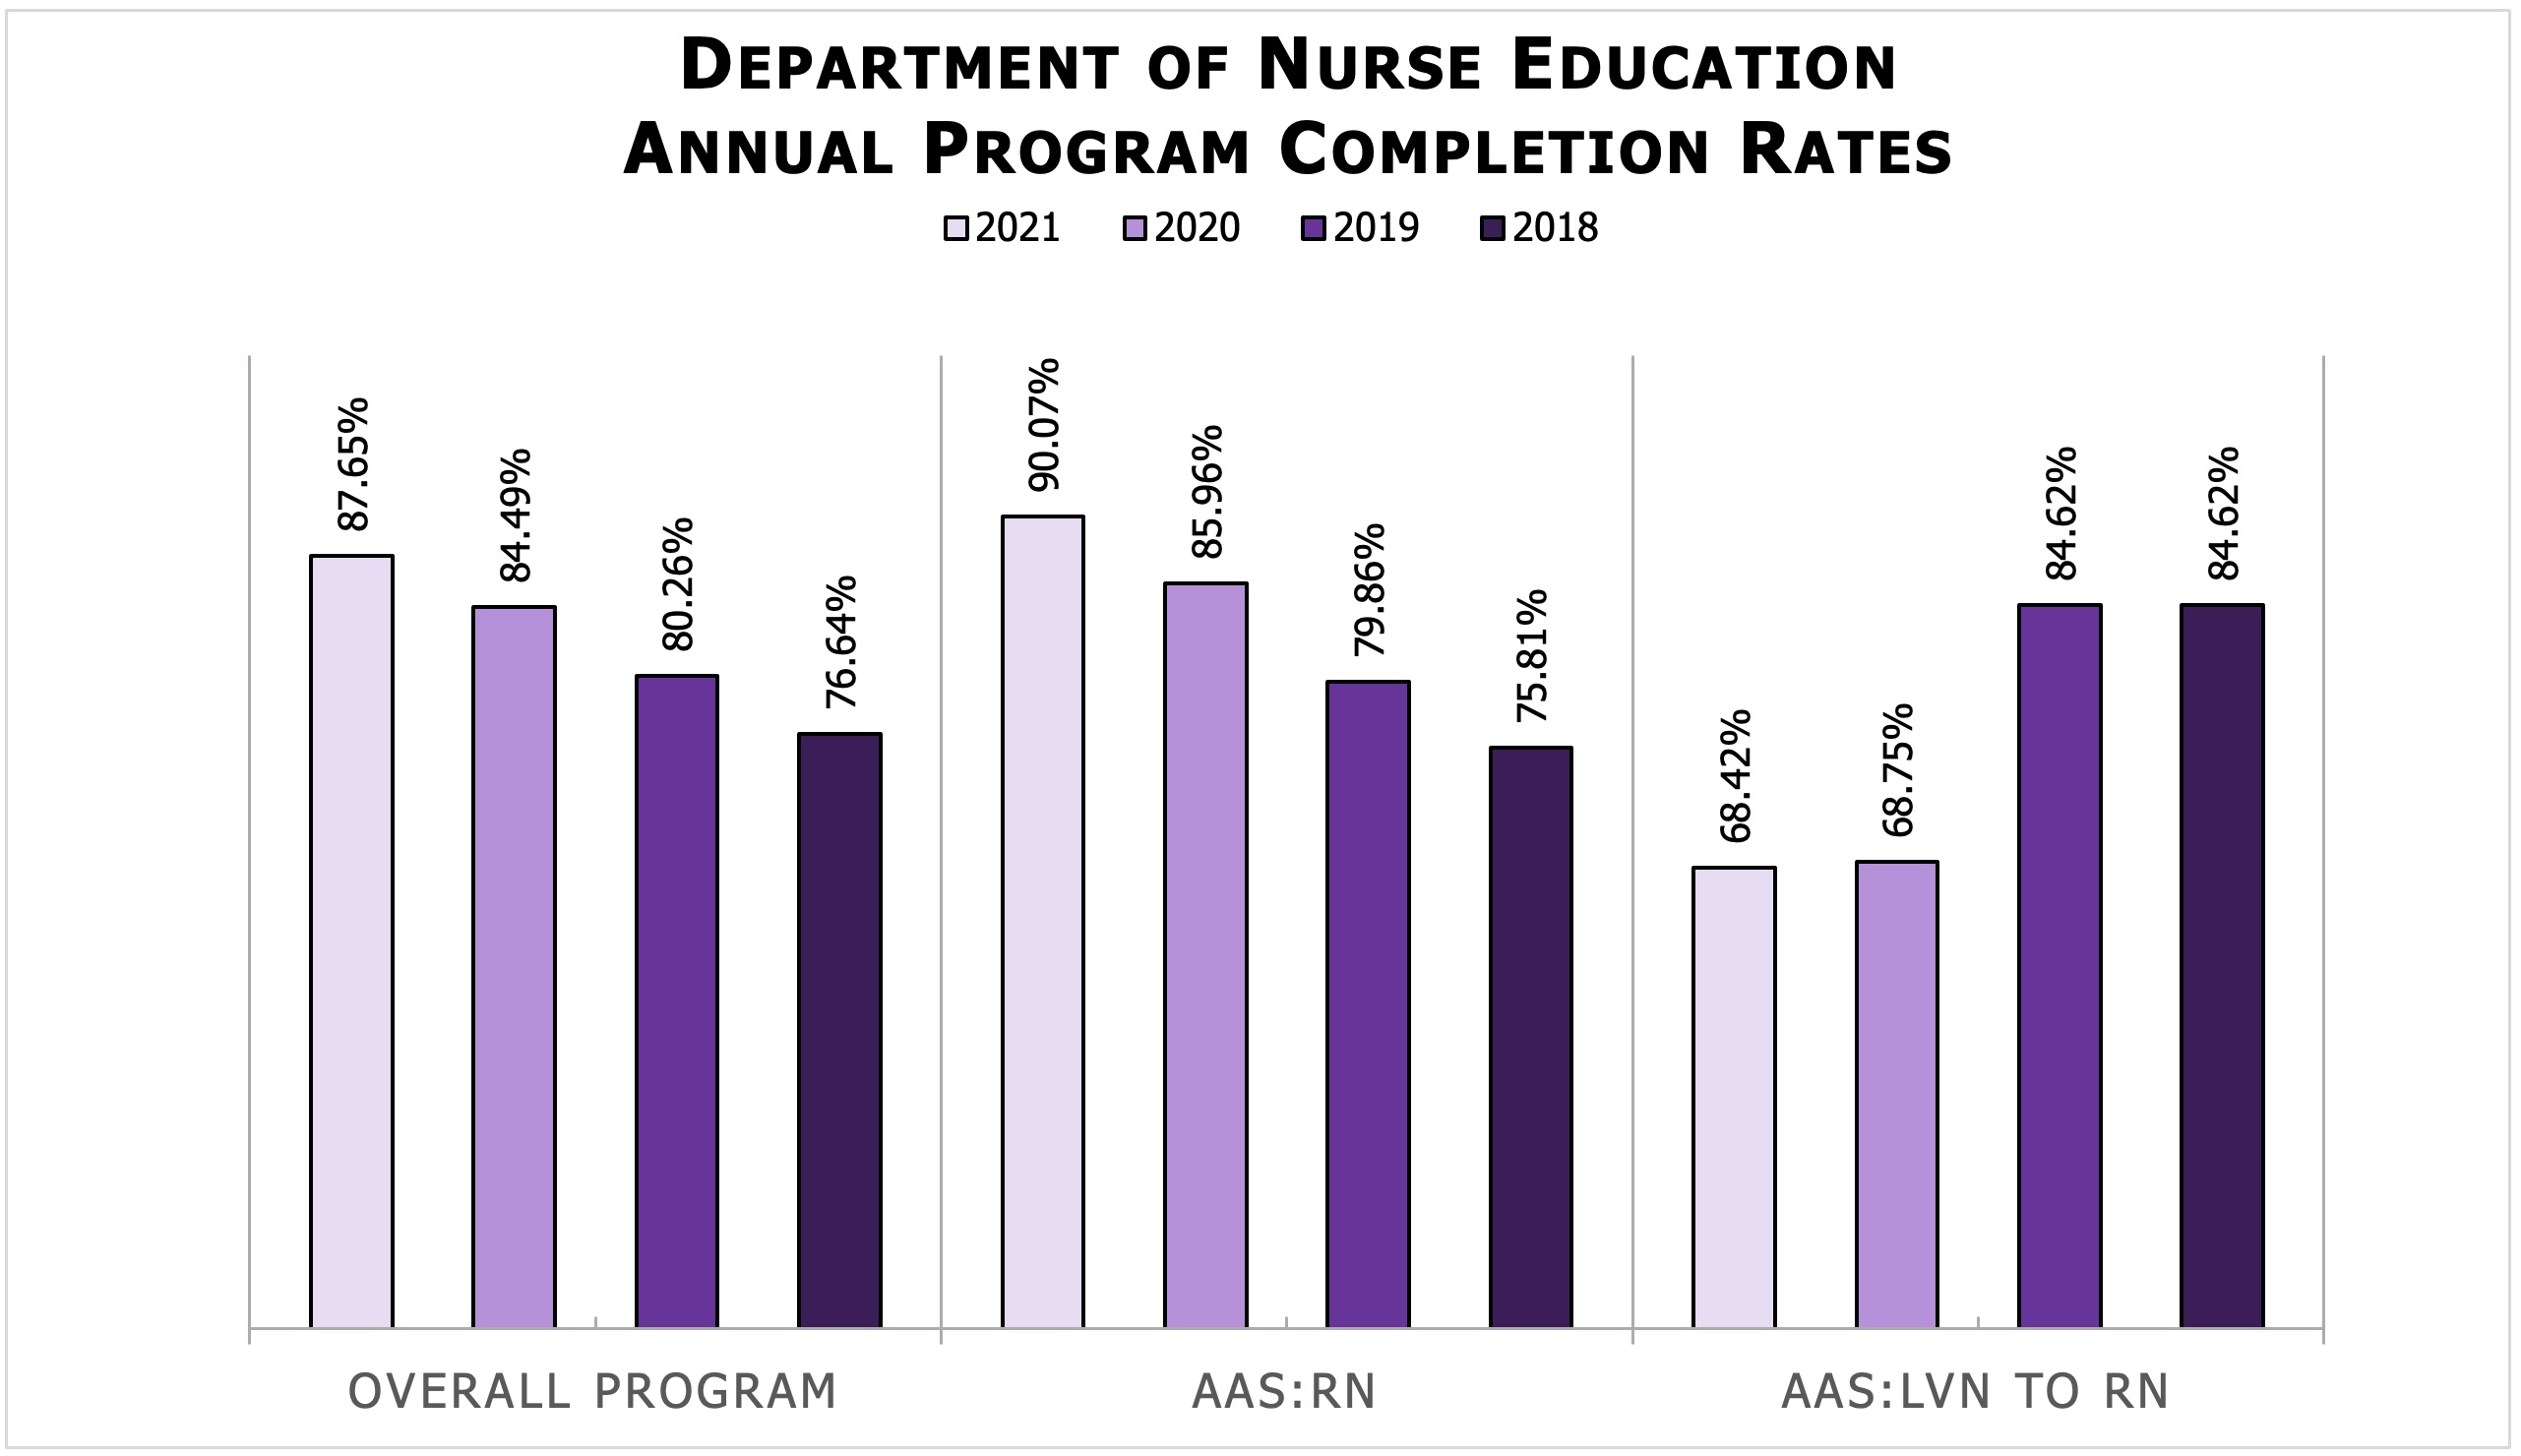 Department of Nurse Education annual program completion rates 2017-2020